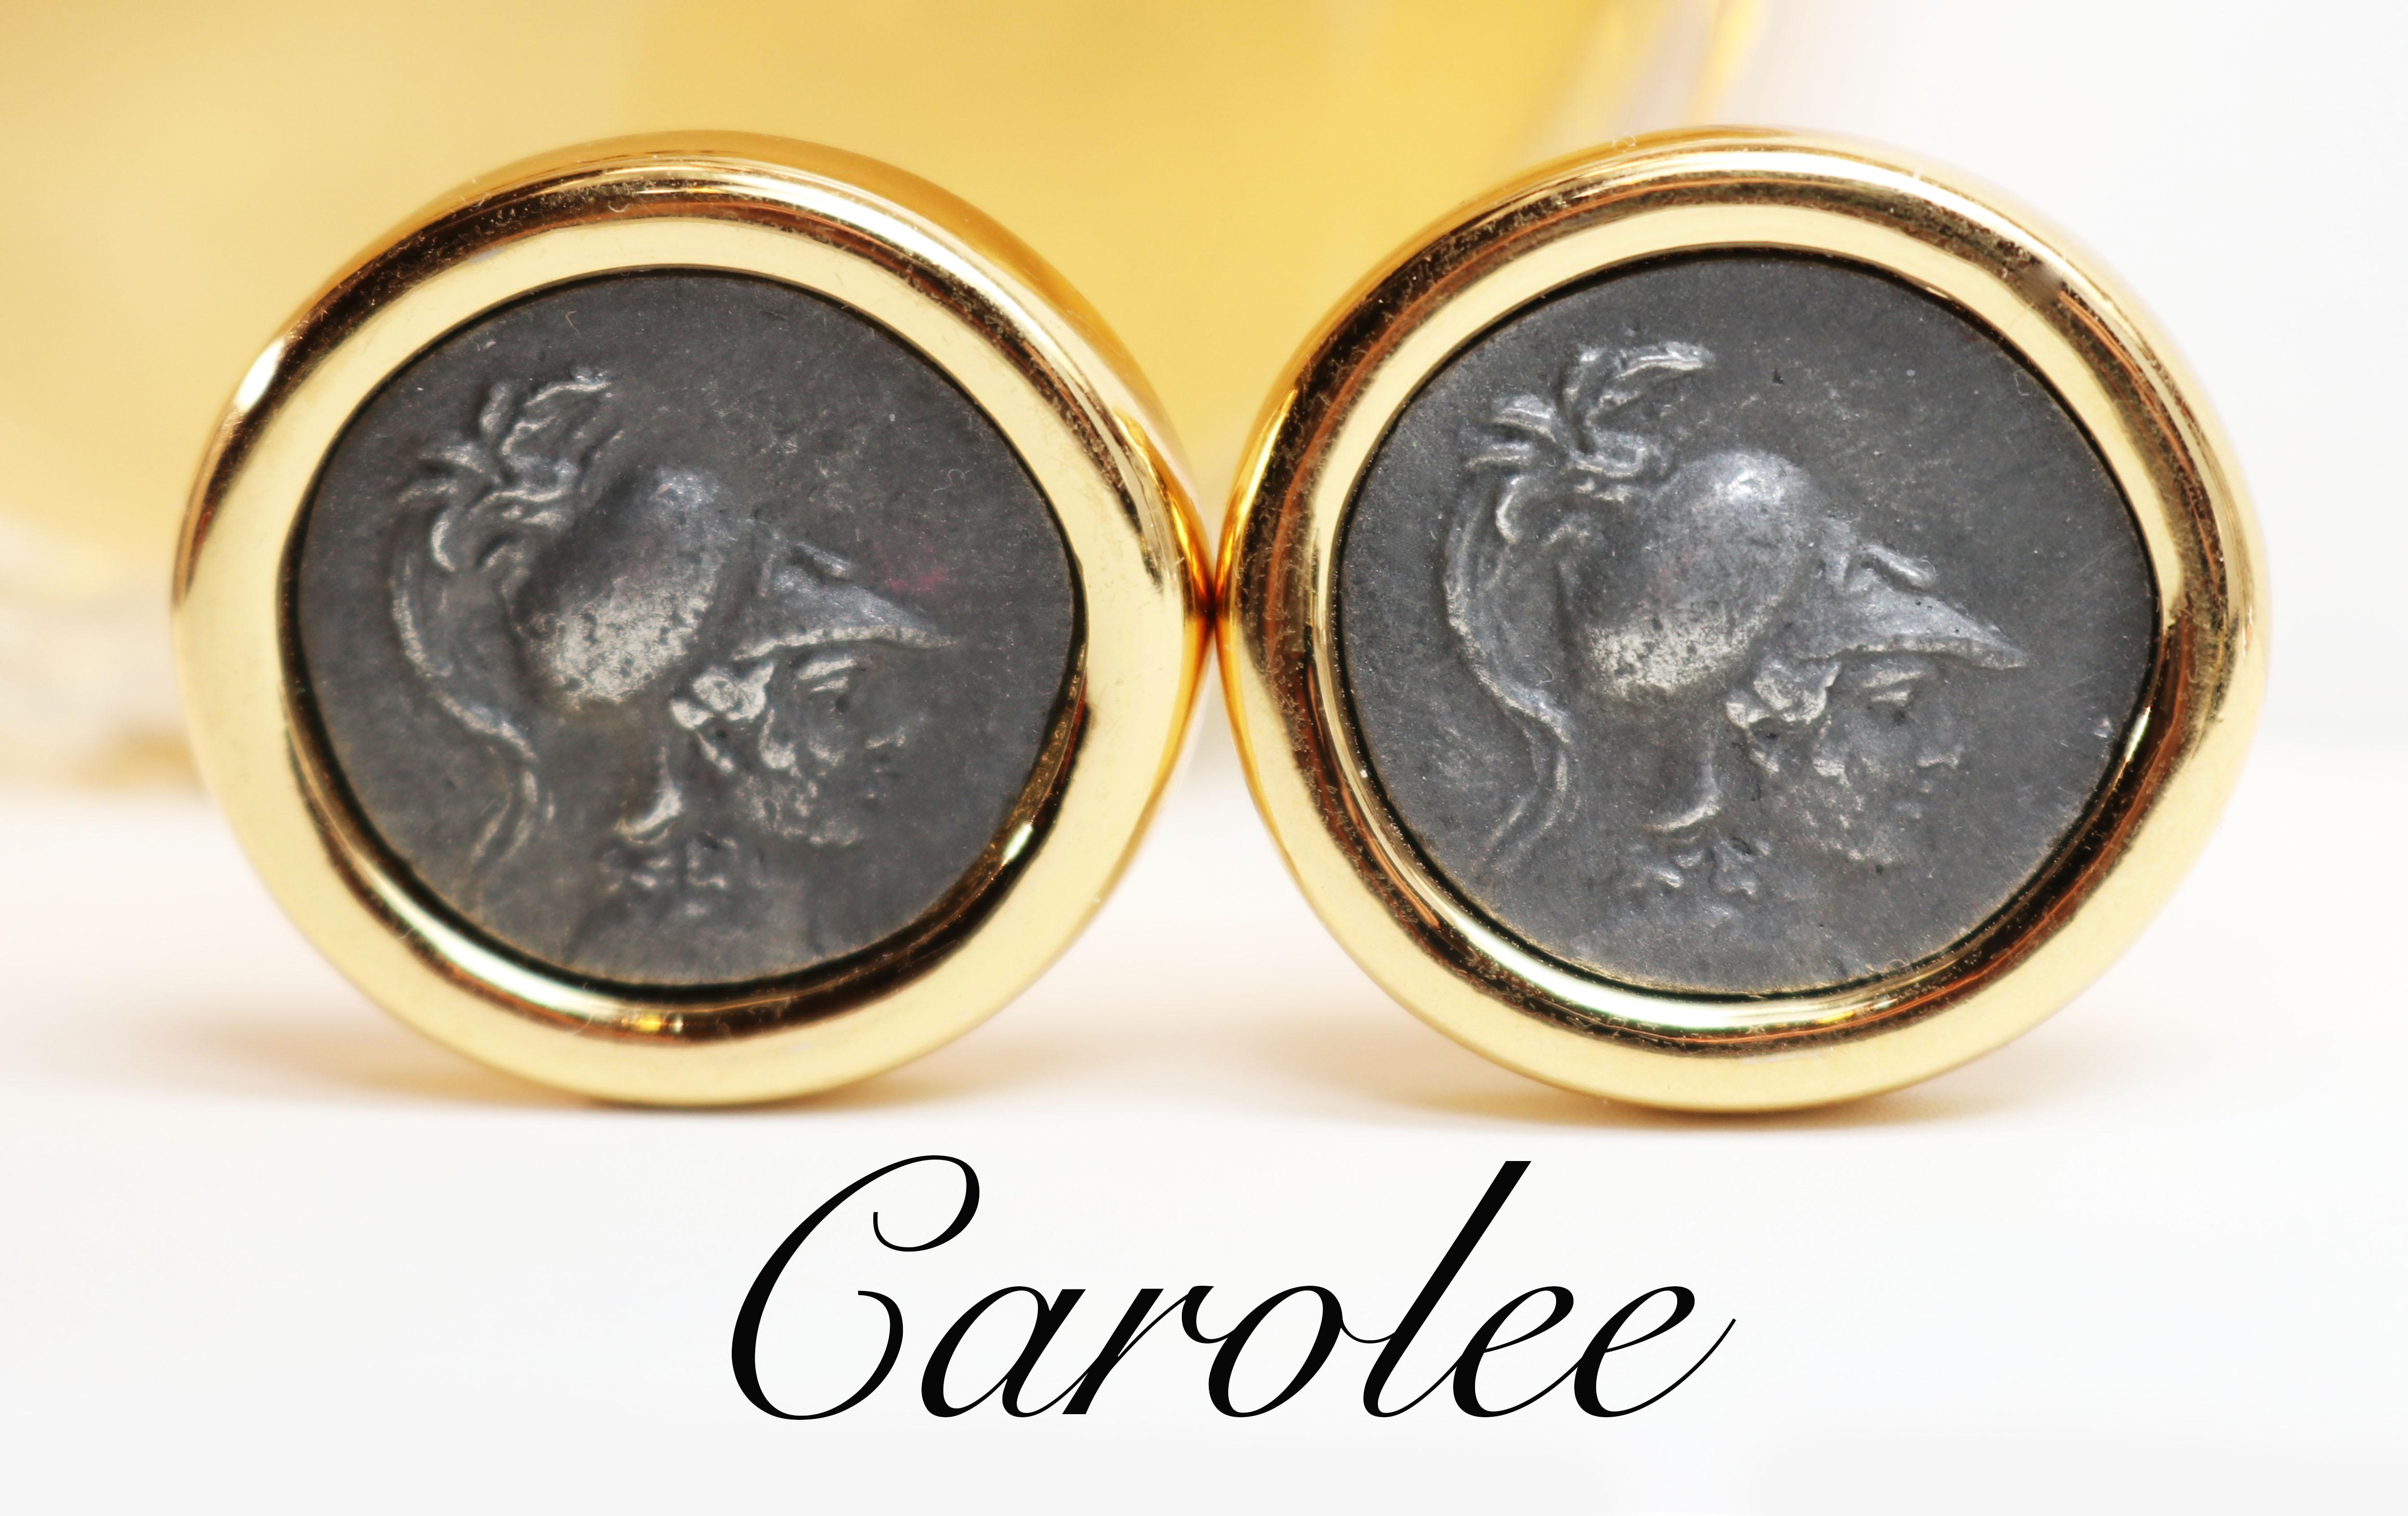 These vintage pieces are signed CAROLEE on the clip on mechanism and reverse of the cameo. They measure approx. 1.25